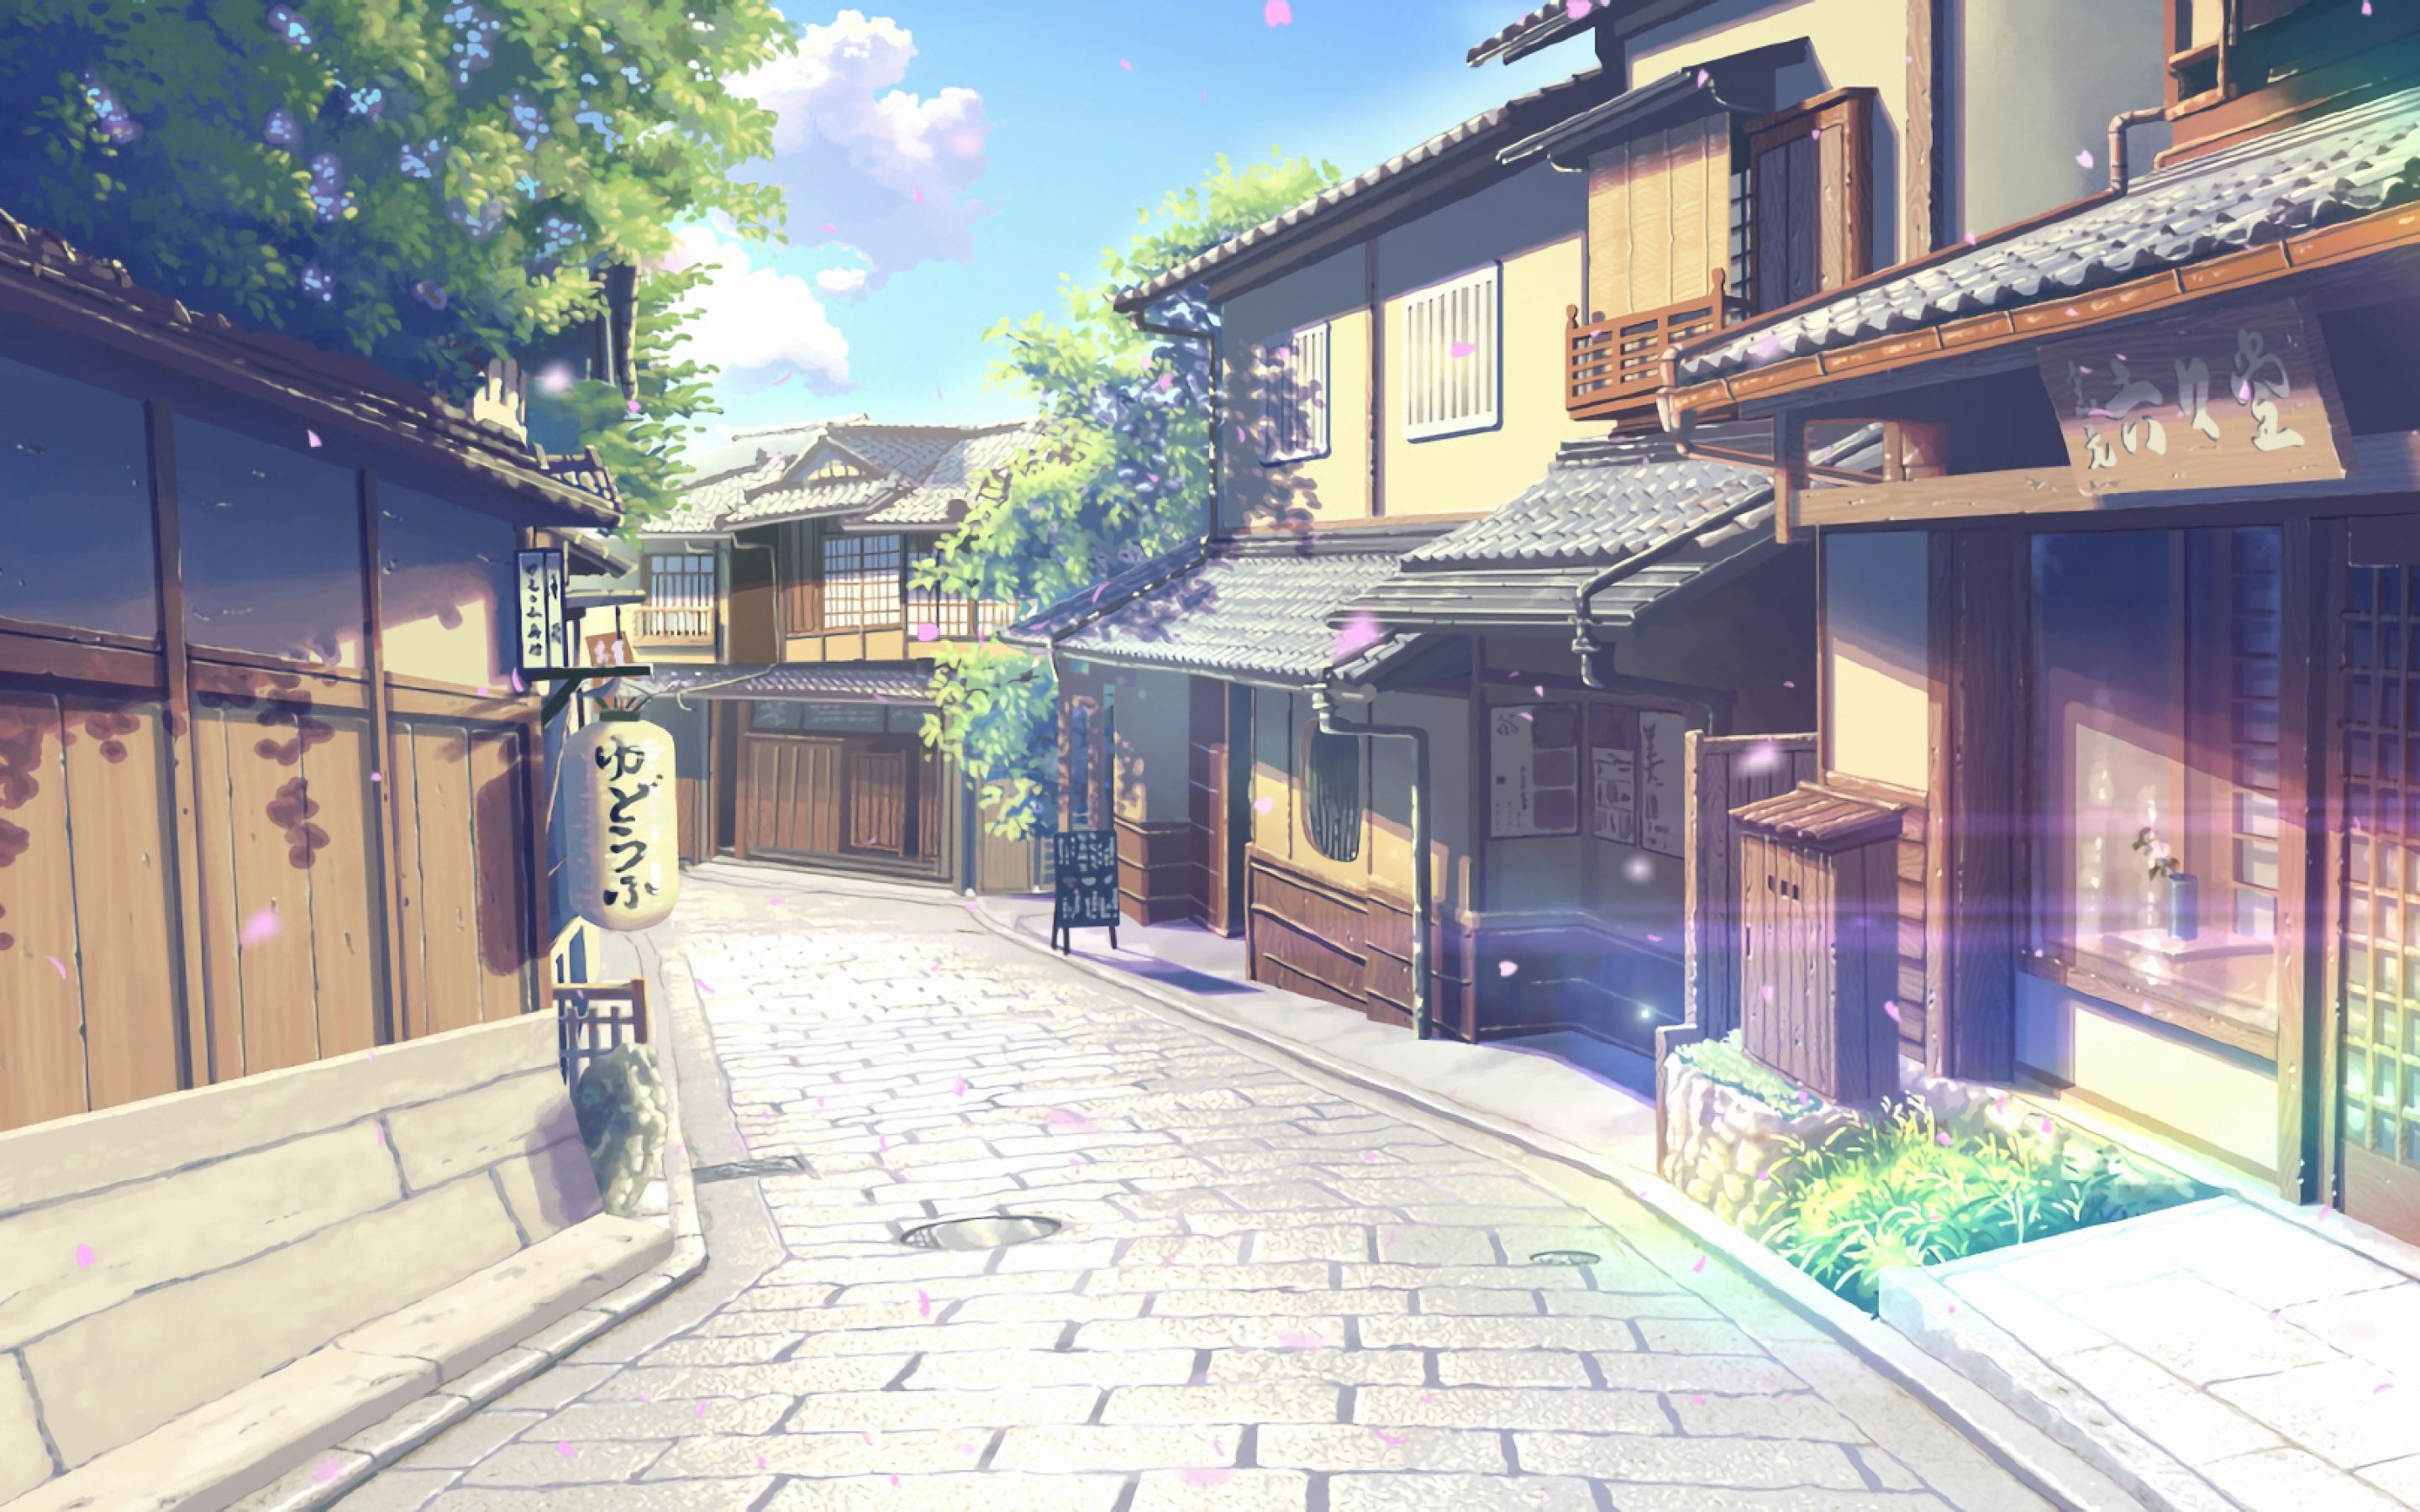  View 34 Download Beautiful Anime Street Background Gif GIF Formal 